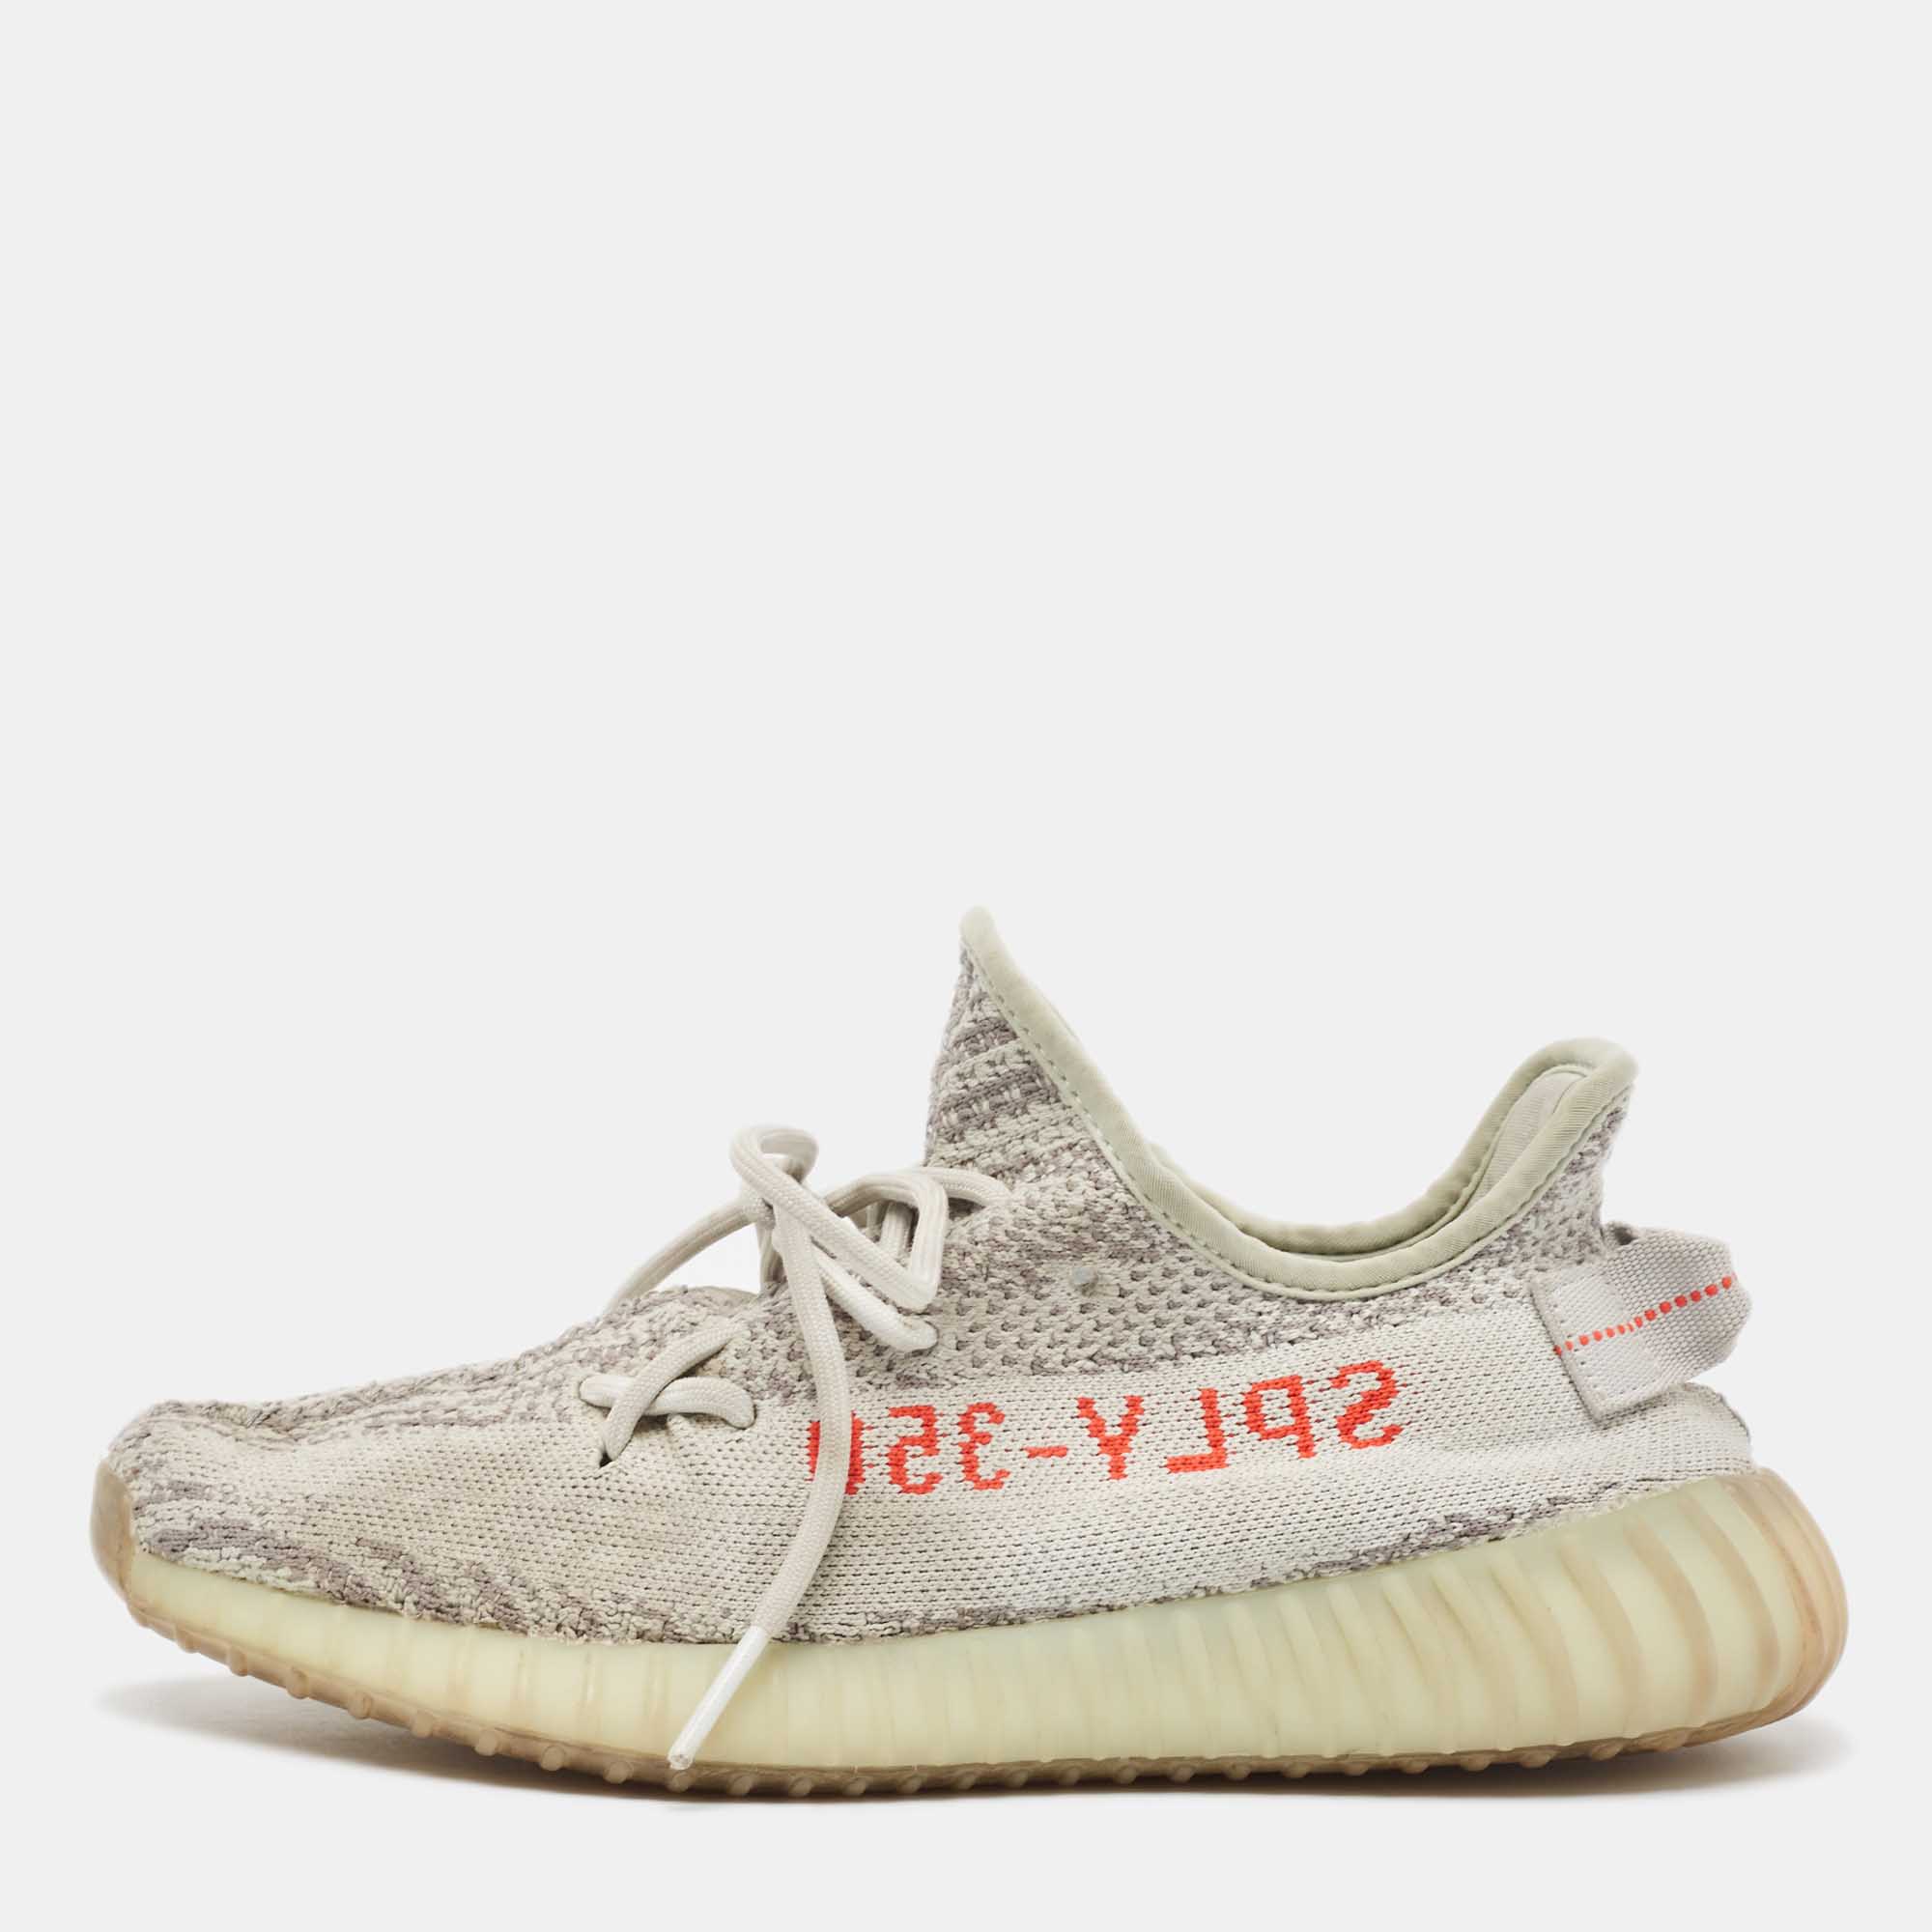 

Yeezy x Adidas Two Tone Knit Fabric Boost 350 V2 Blue Tint Sneakers Size 40 2/3, Grey